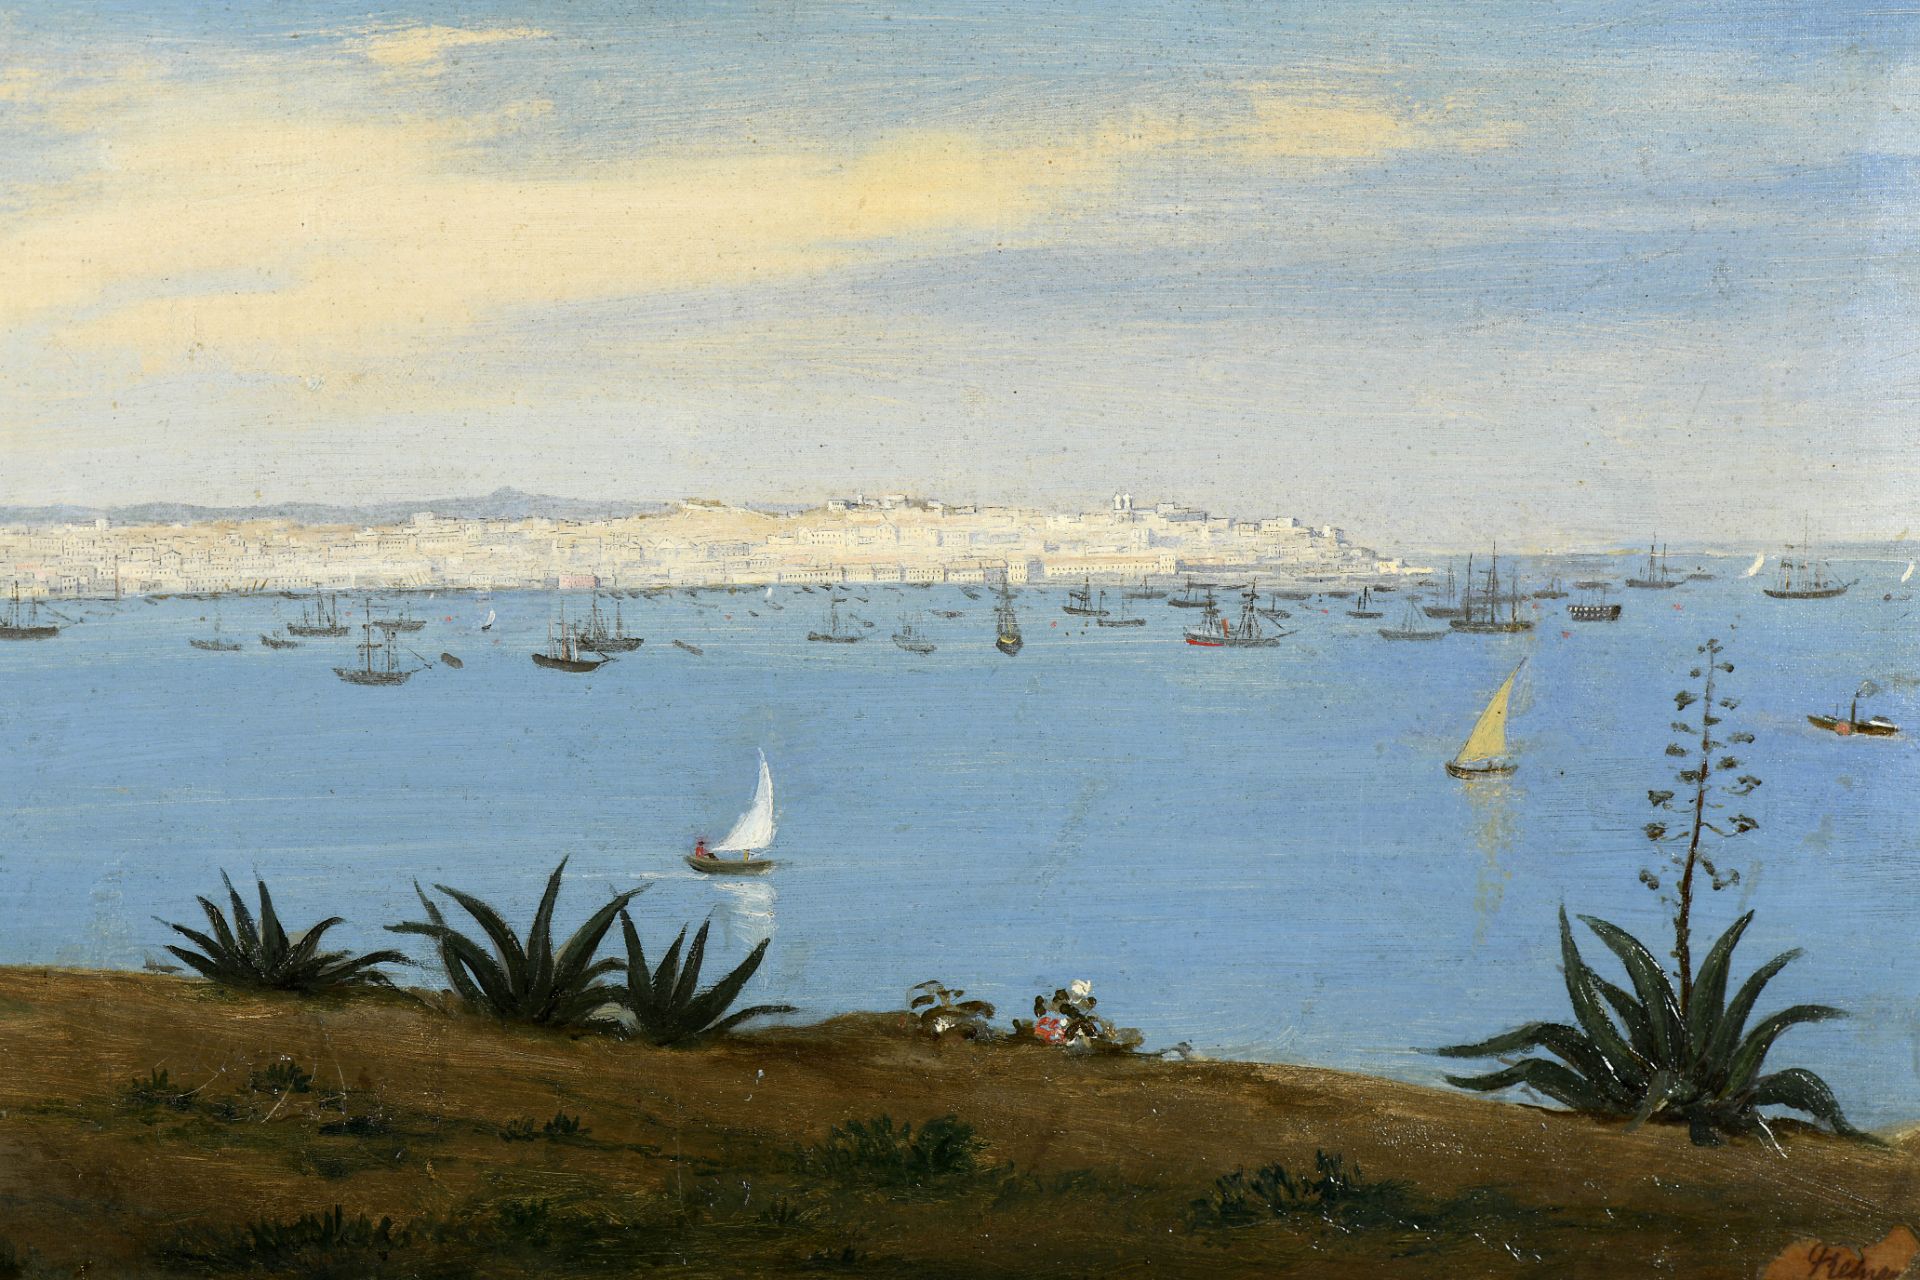 View of the Tagus from the Santos Palace" and "View of Lisbon from the south bank of the Tagus River - Image 10 of 14